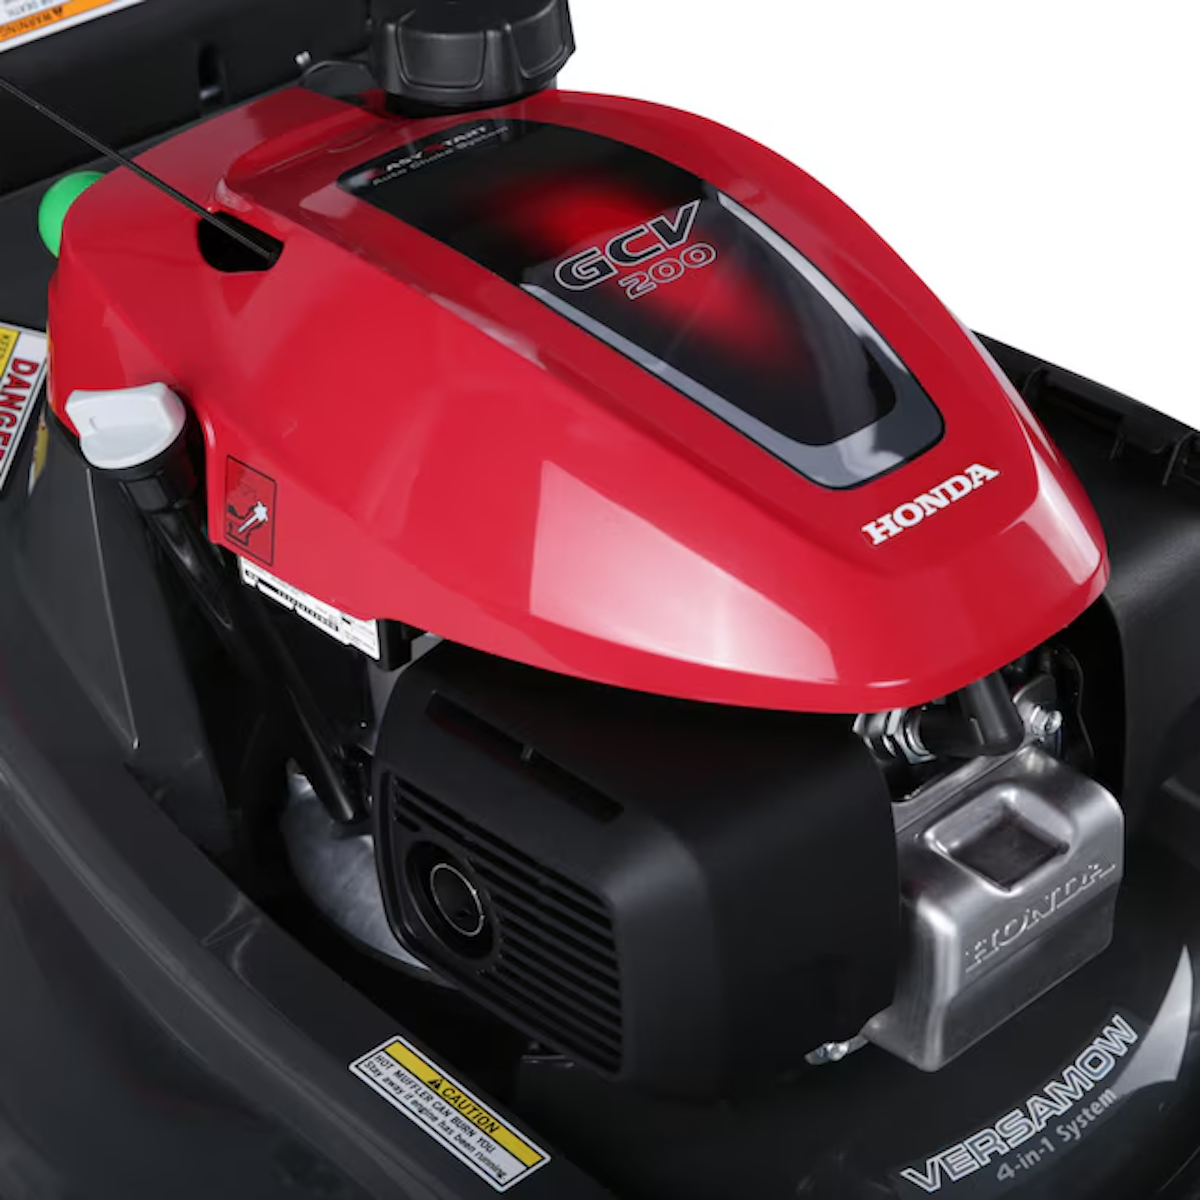 A red Honda mower engine is shown close up.